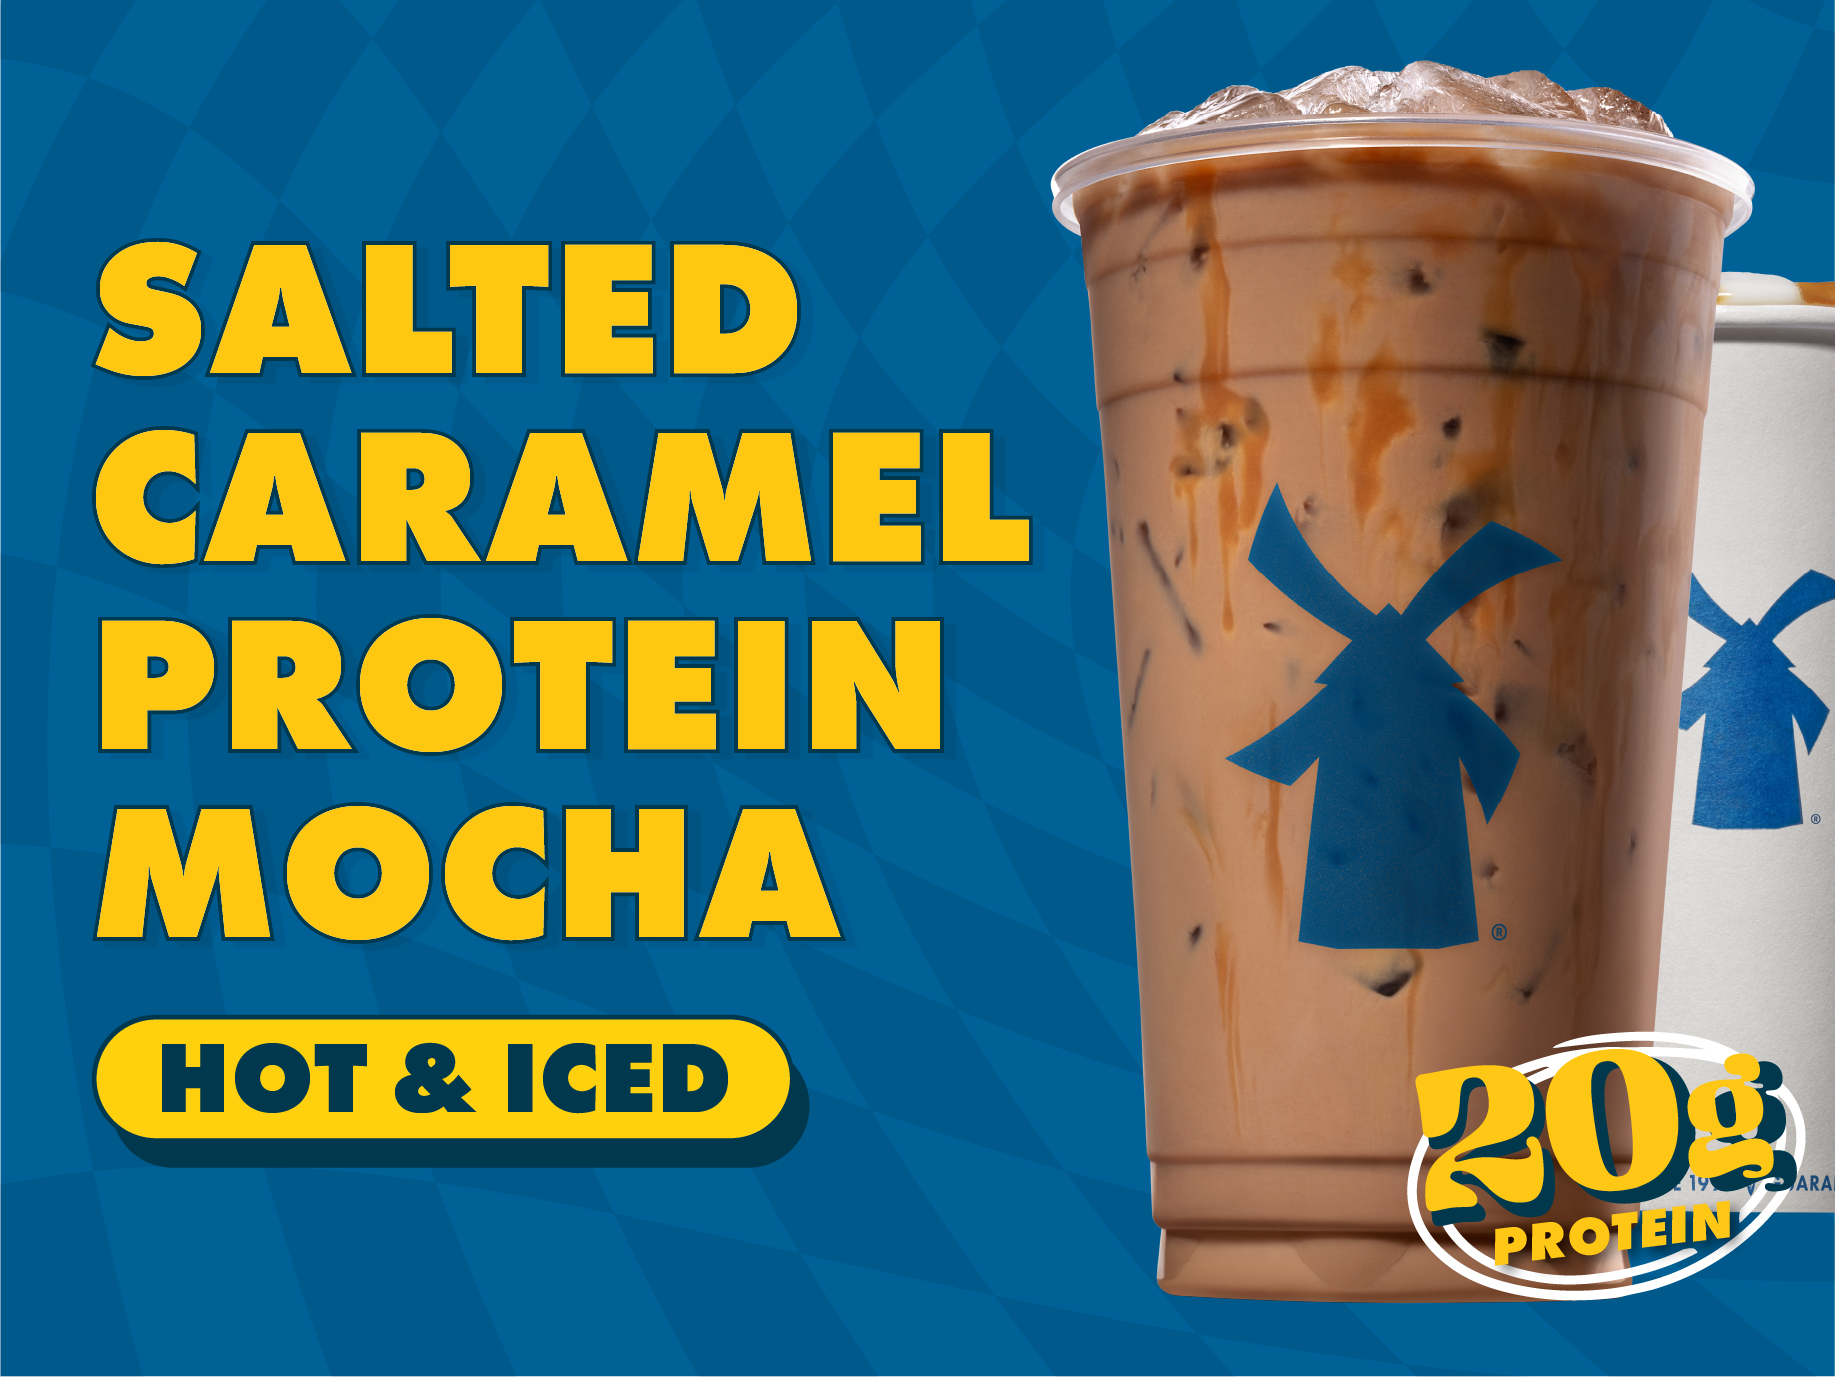 The Salted Caramel Protein Mocha features a blend of salted caramel flavor, espresso, chocolate sauce, protein milk, topped with caramel drizzle